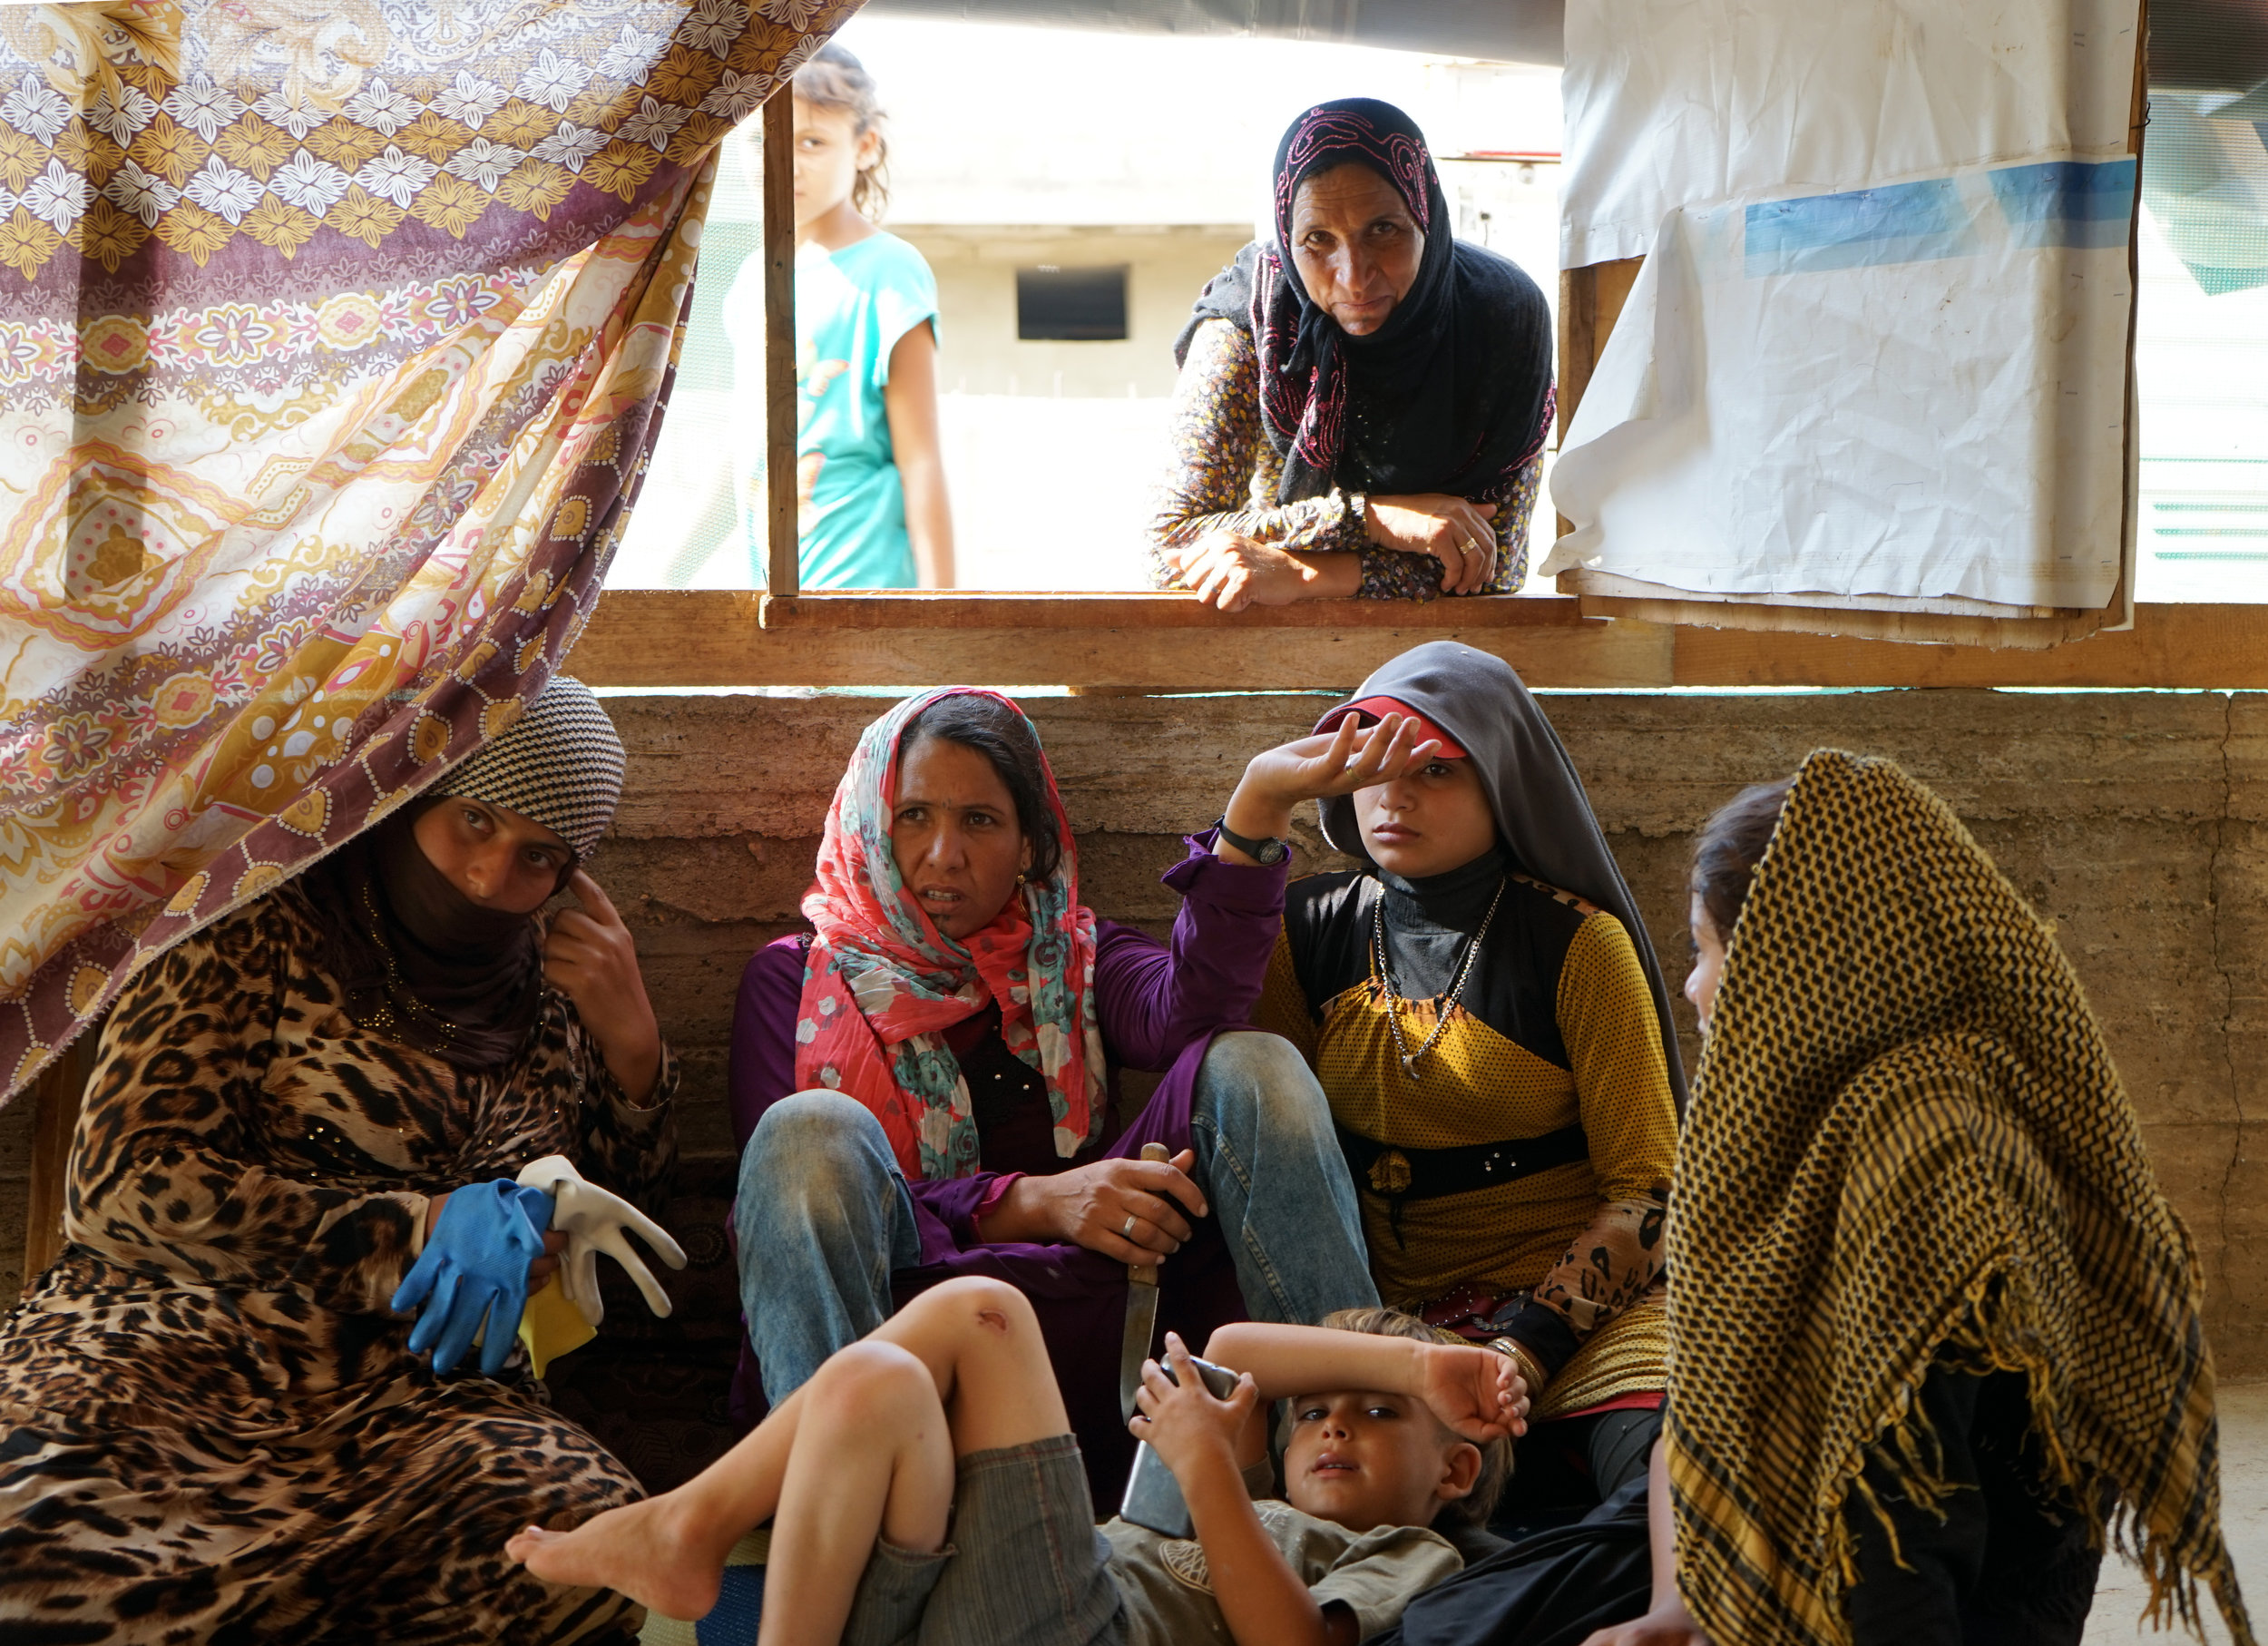  A group of women sit together in a tent in a UNHCR Syrian refugee in 'Akkar, Lebanon on August 23, 2016. 